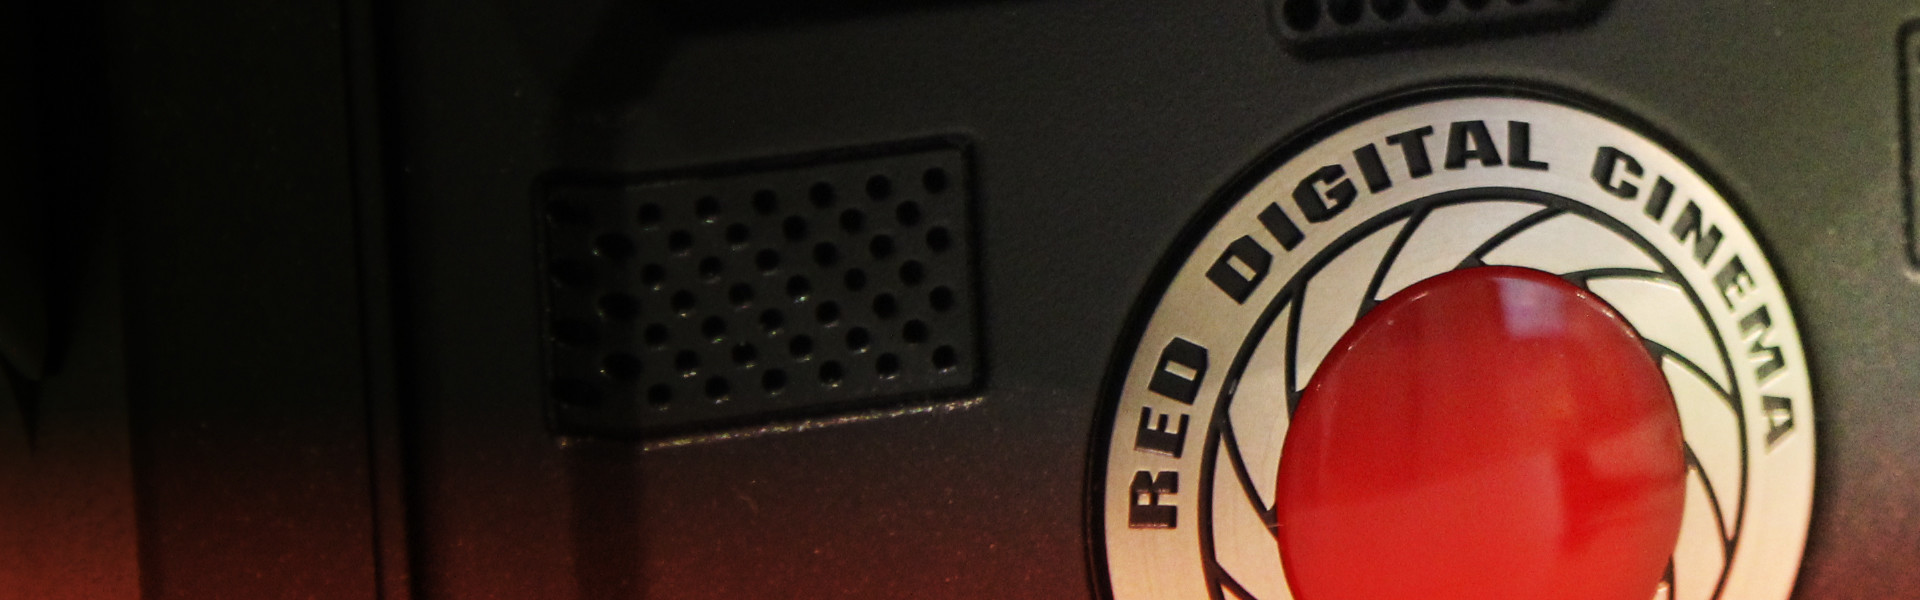 Header image for article New App for RED EPIC Menus